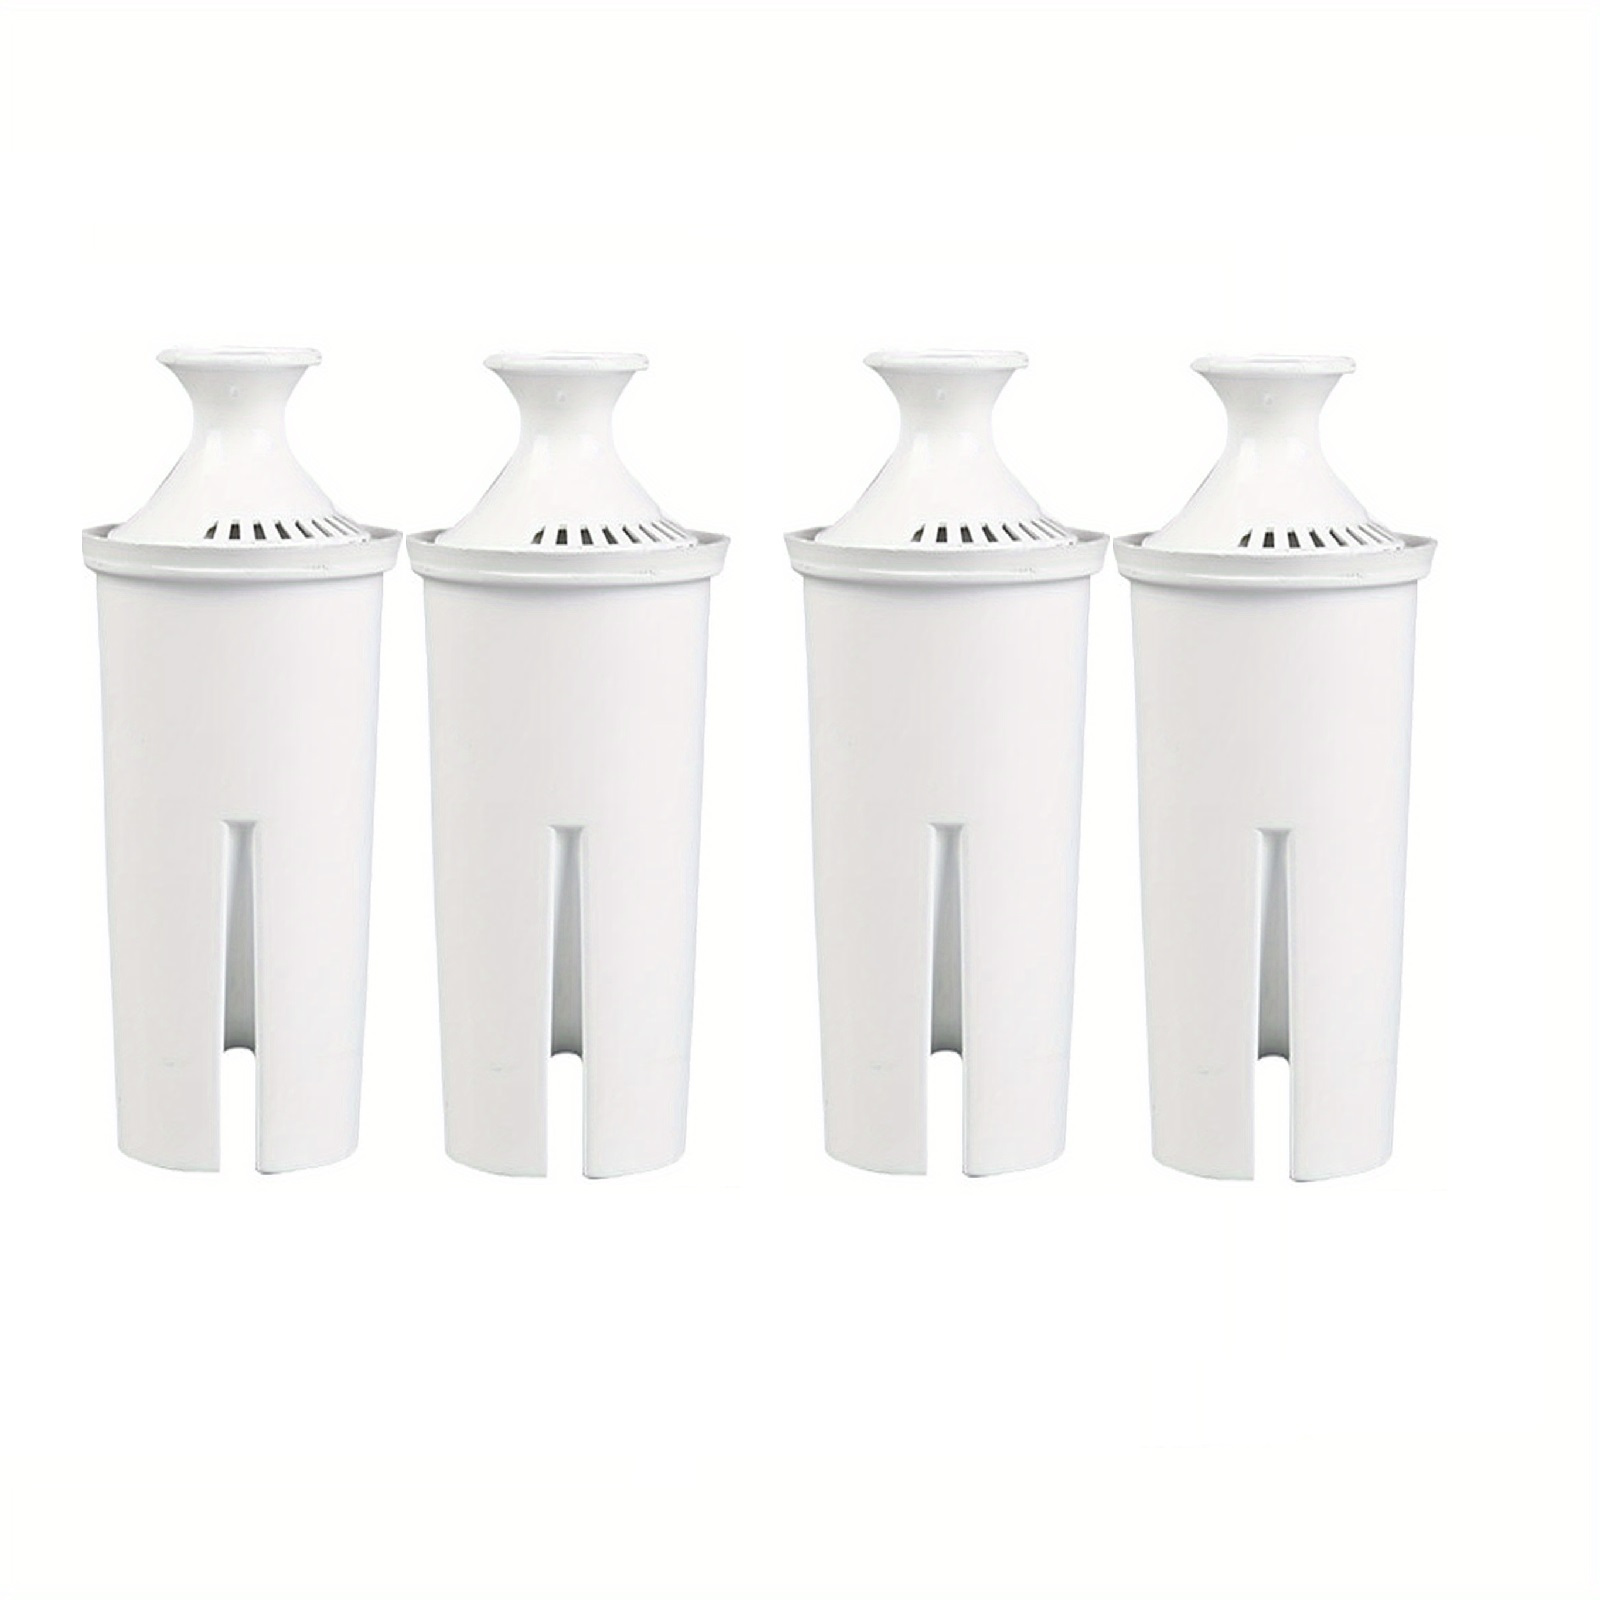  Brita Standard Water Filter Replacements for Pitchers